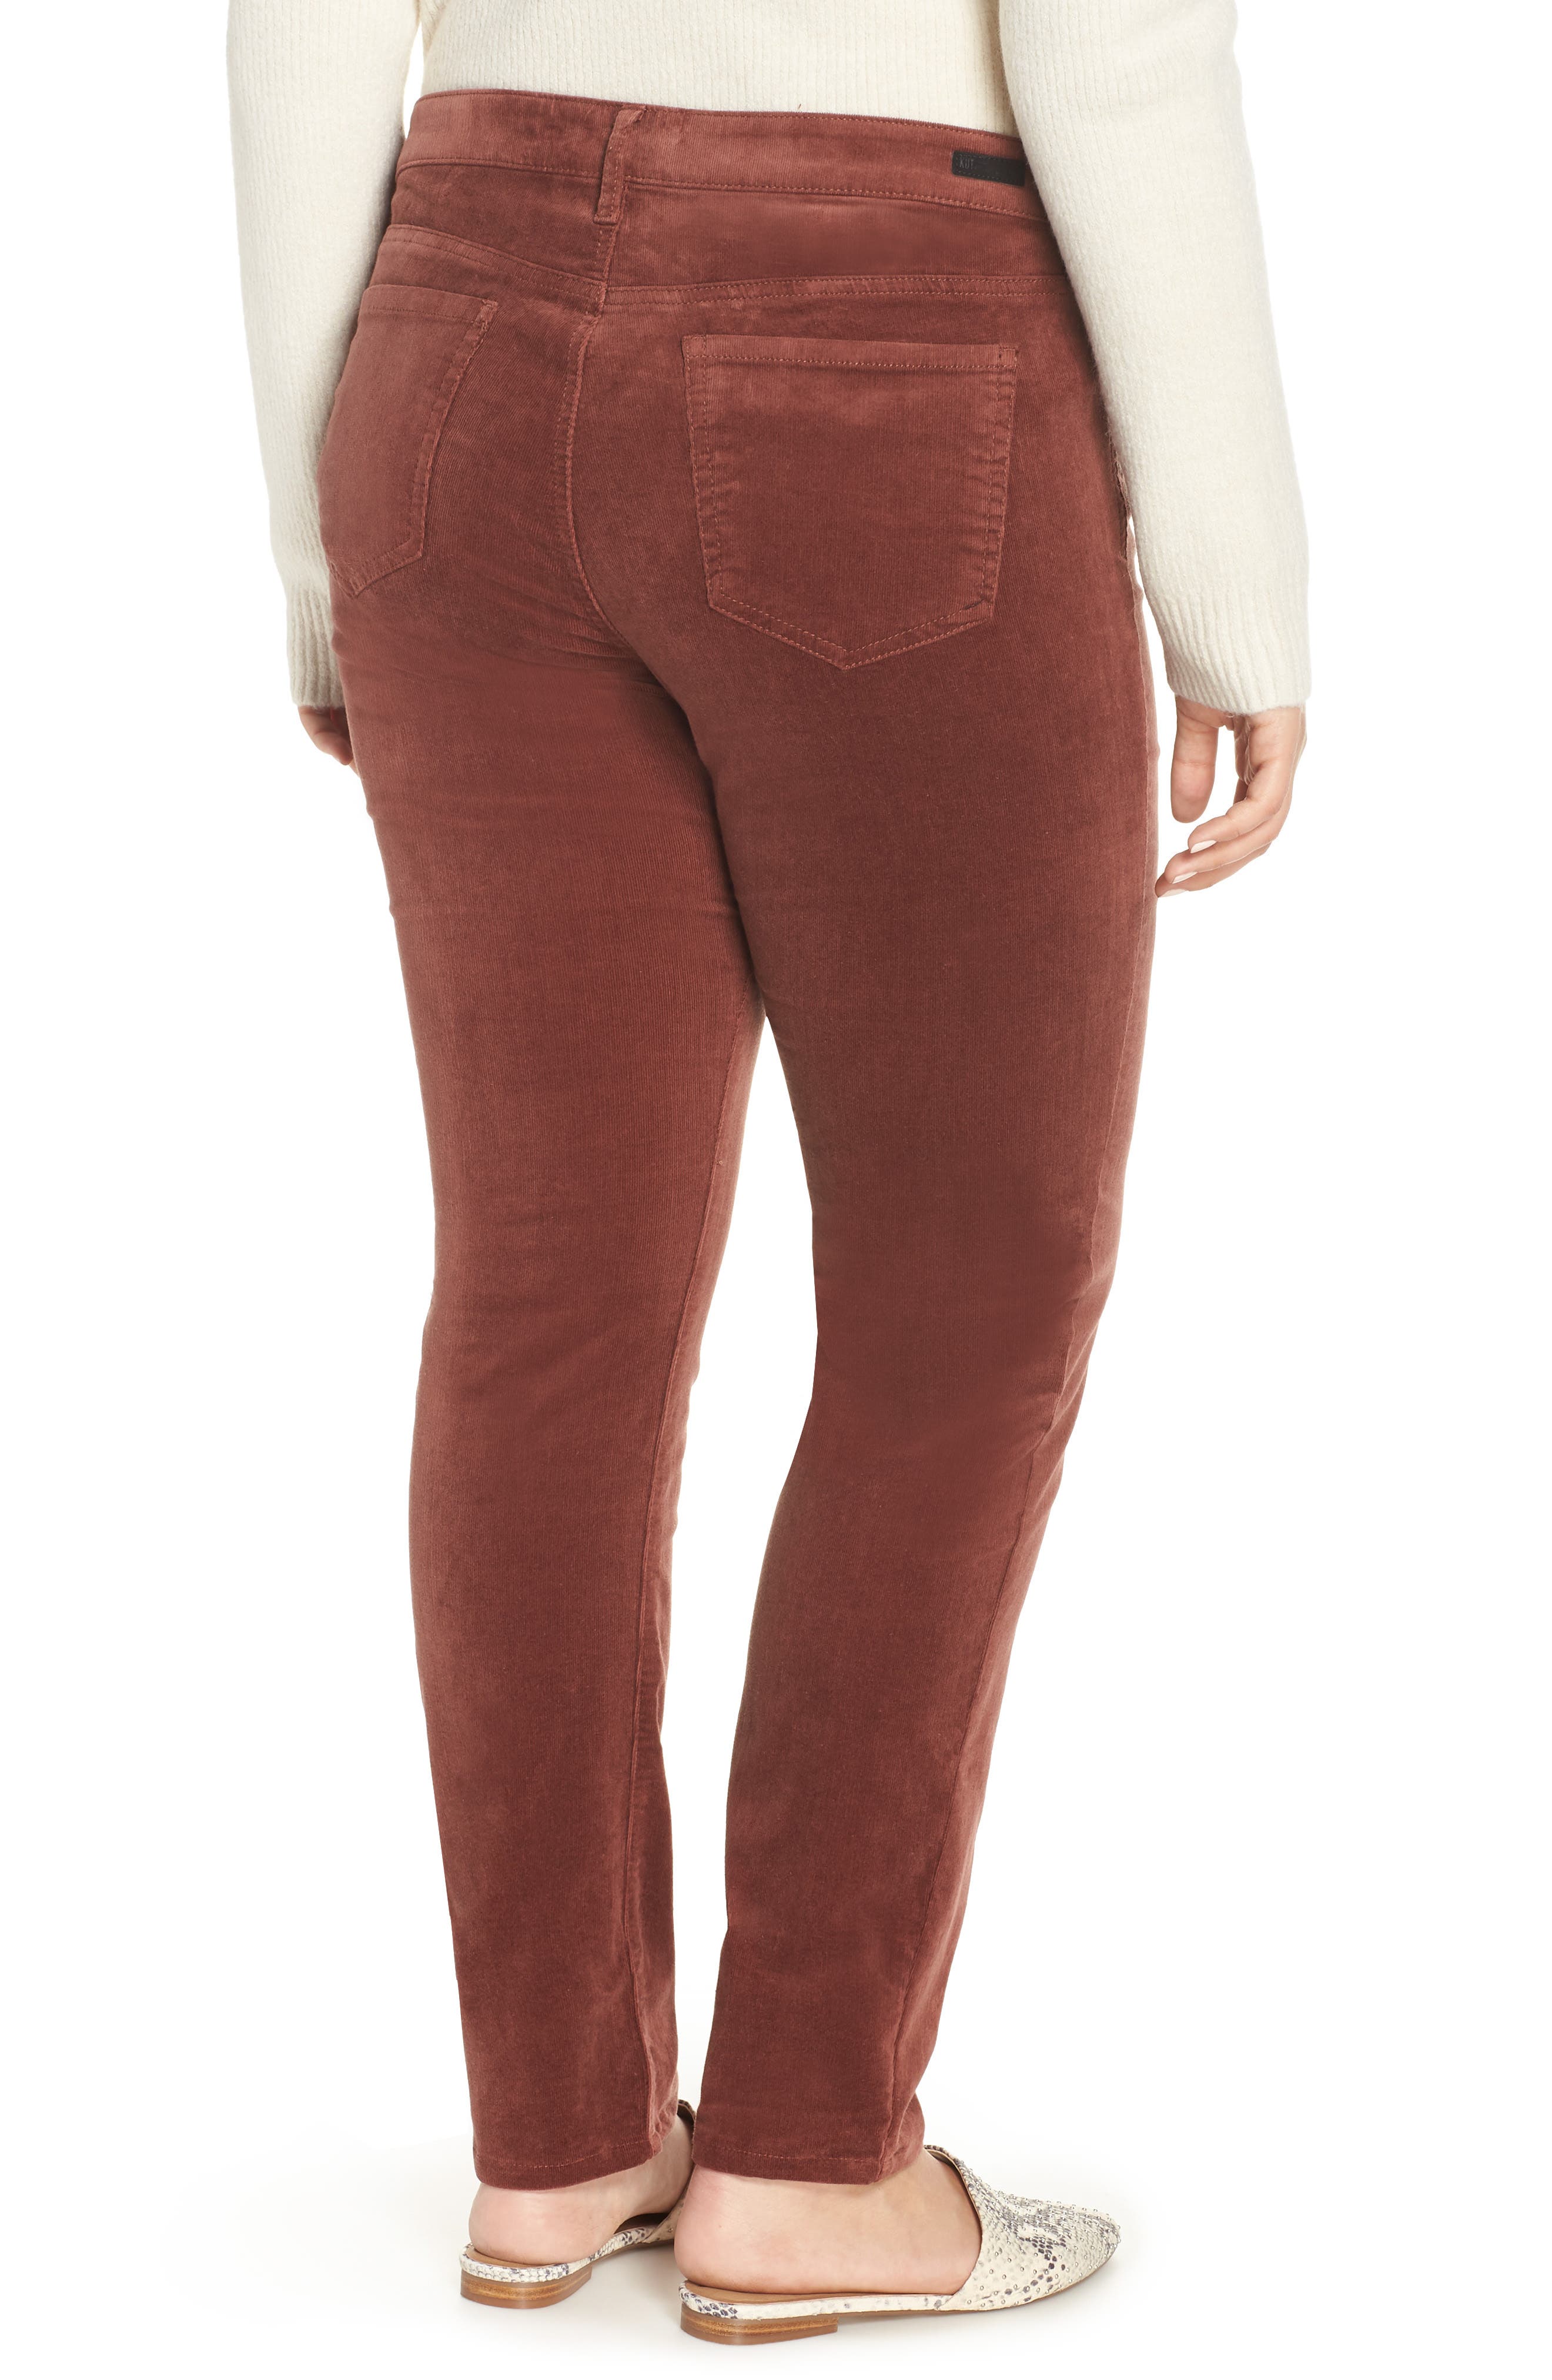 KUT from the Kloth | Diana Stretch Corduroy Skinny Pants | Nordstrom Rack